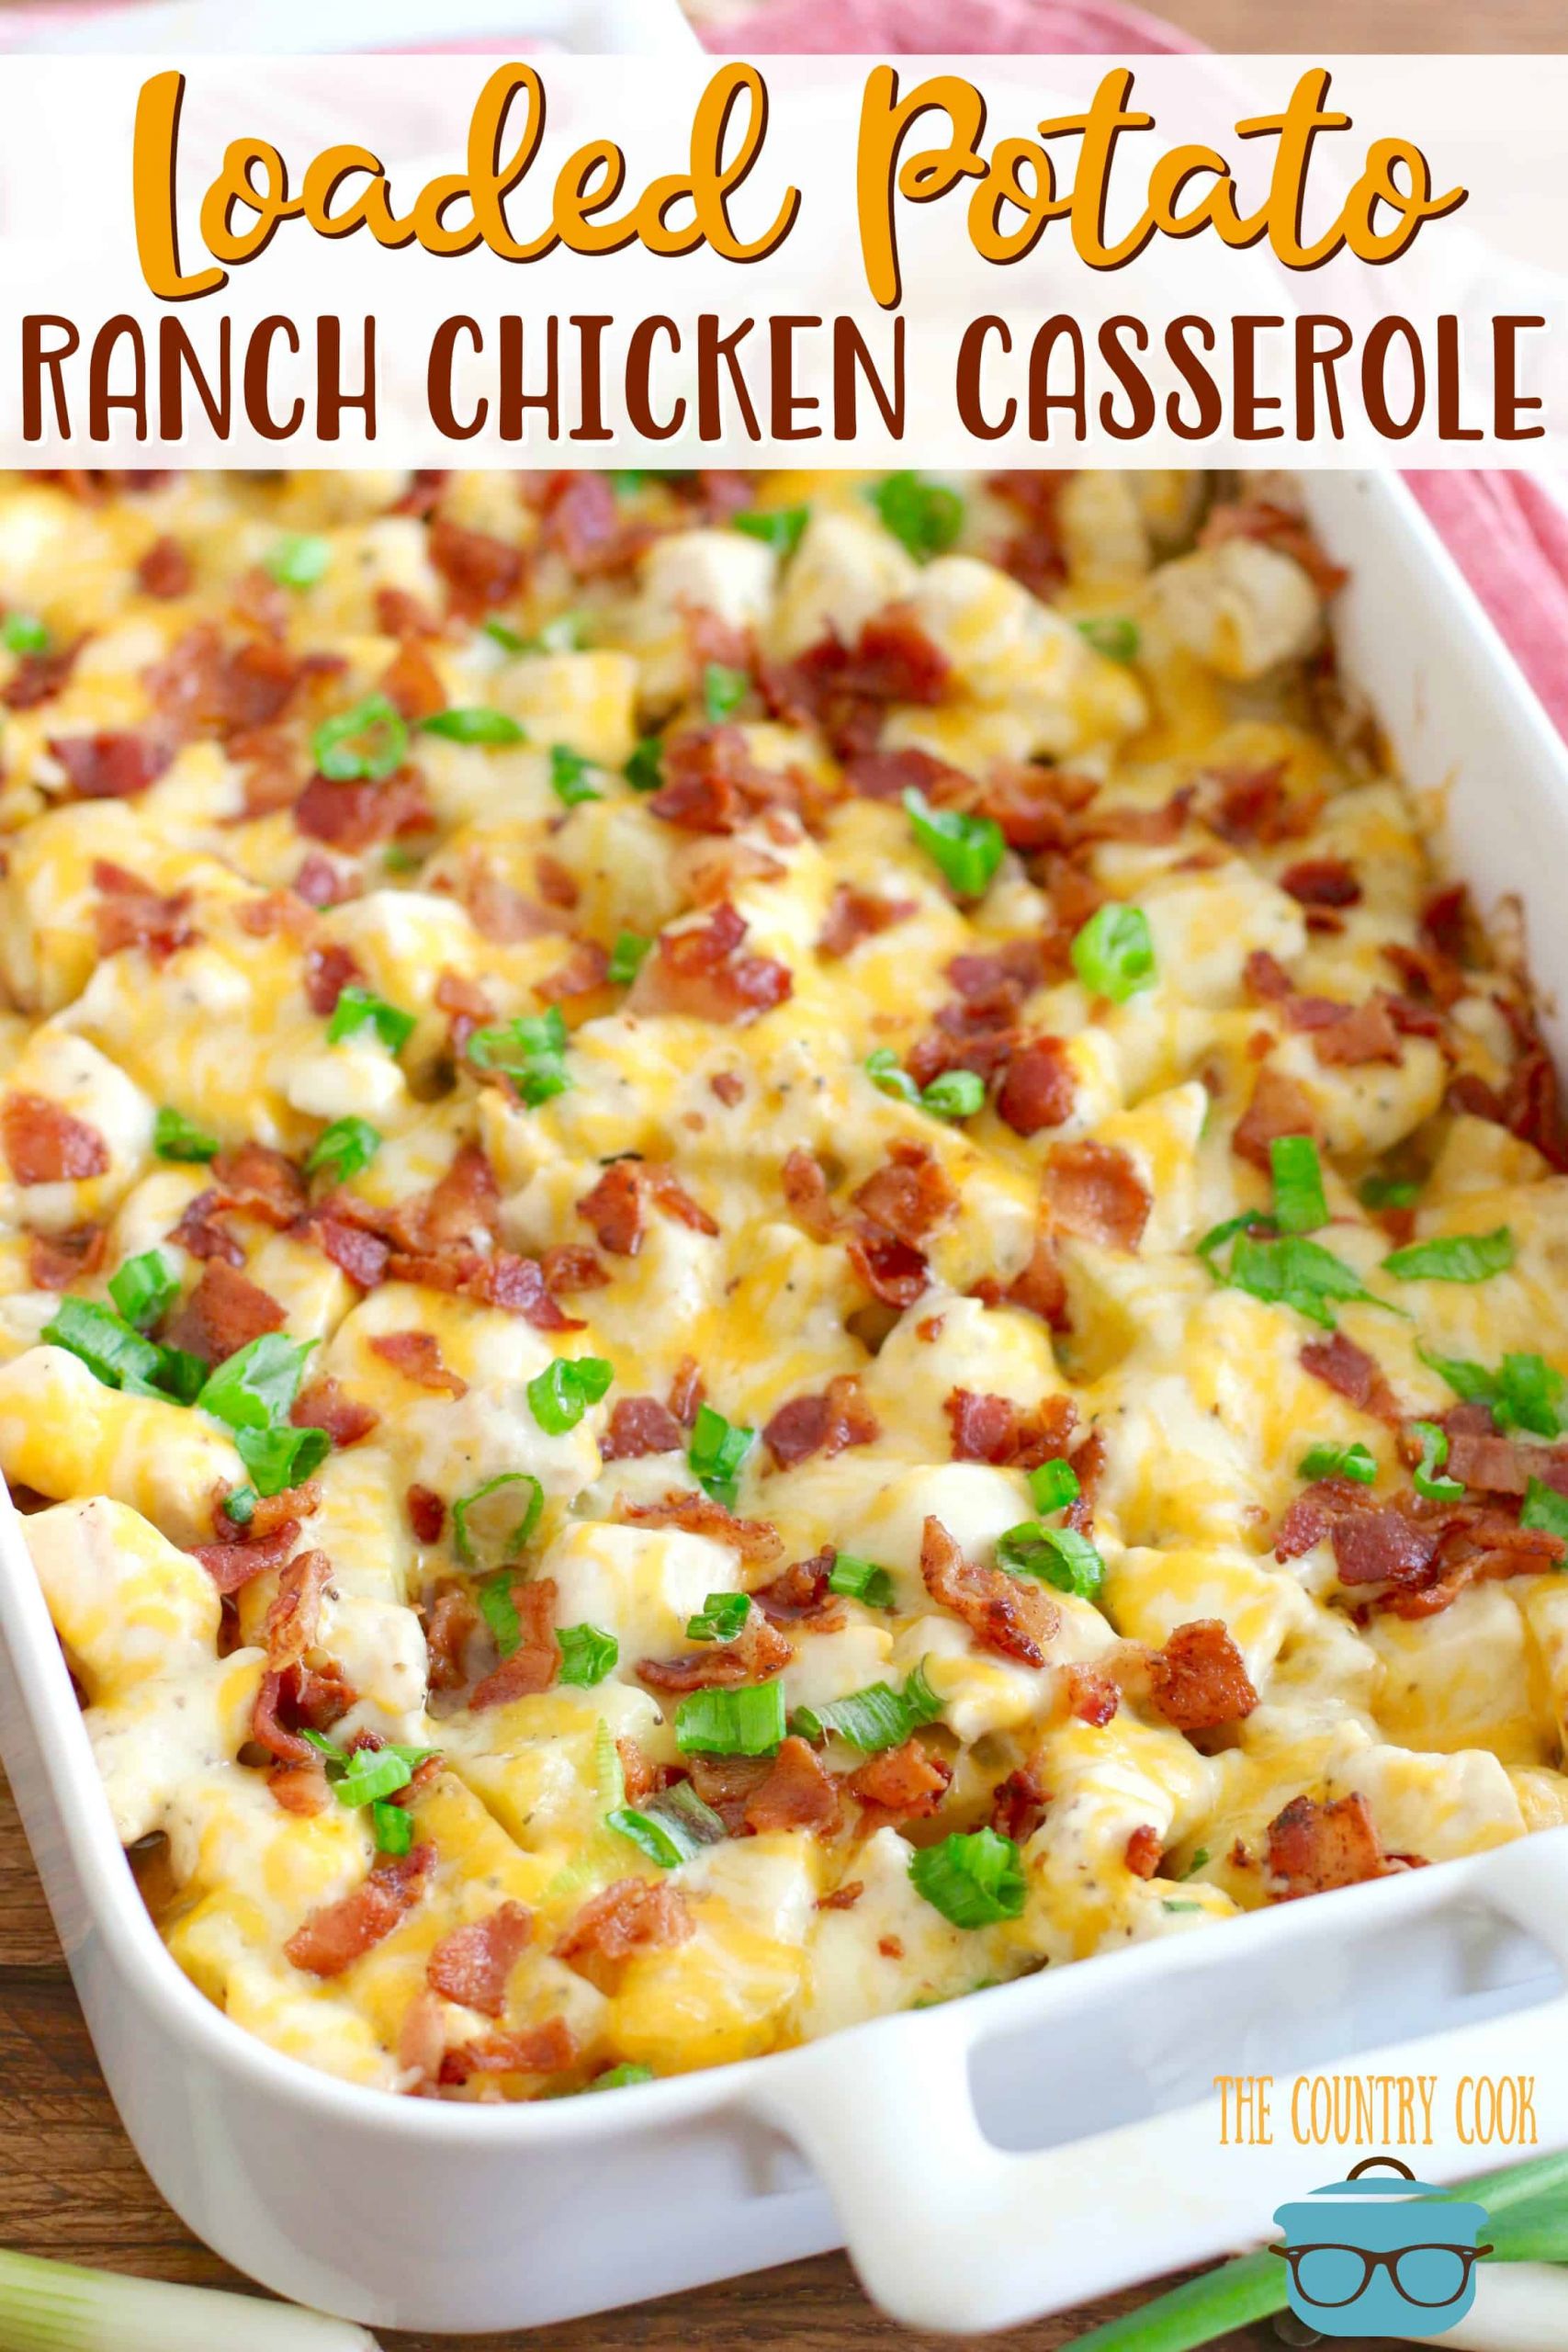 Chicken And Potatoes Casserole Recipe
 Loaded Potato Ranch Chicken Casserole The Country Cook